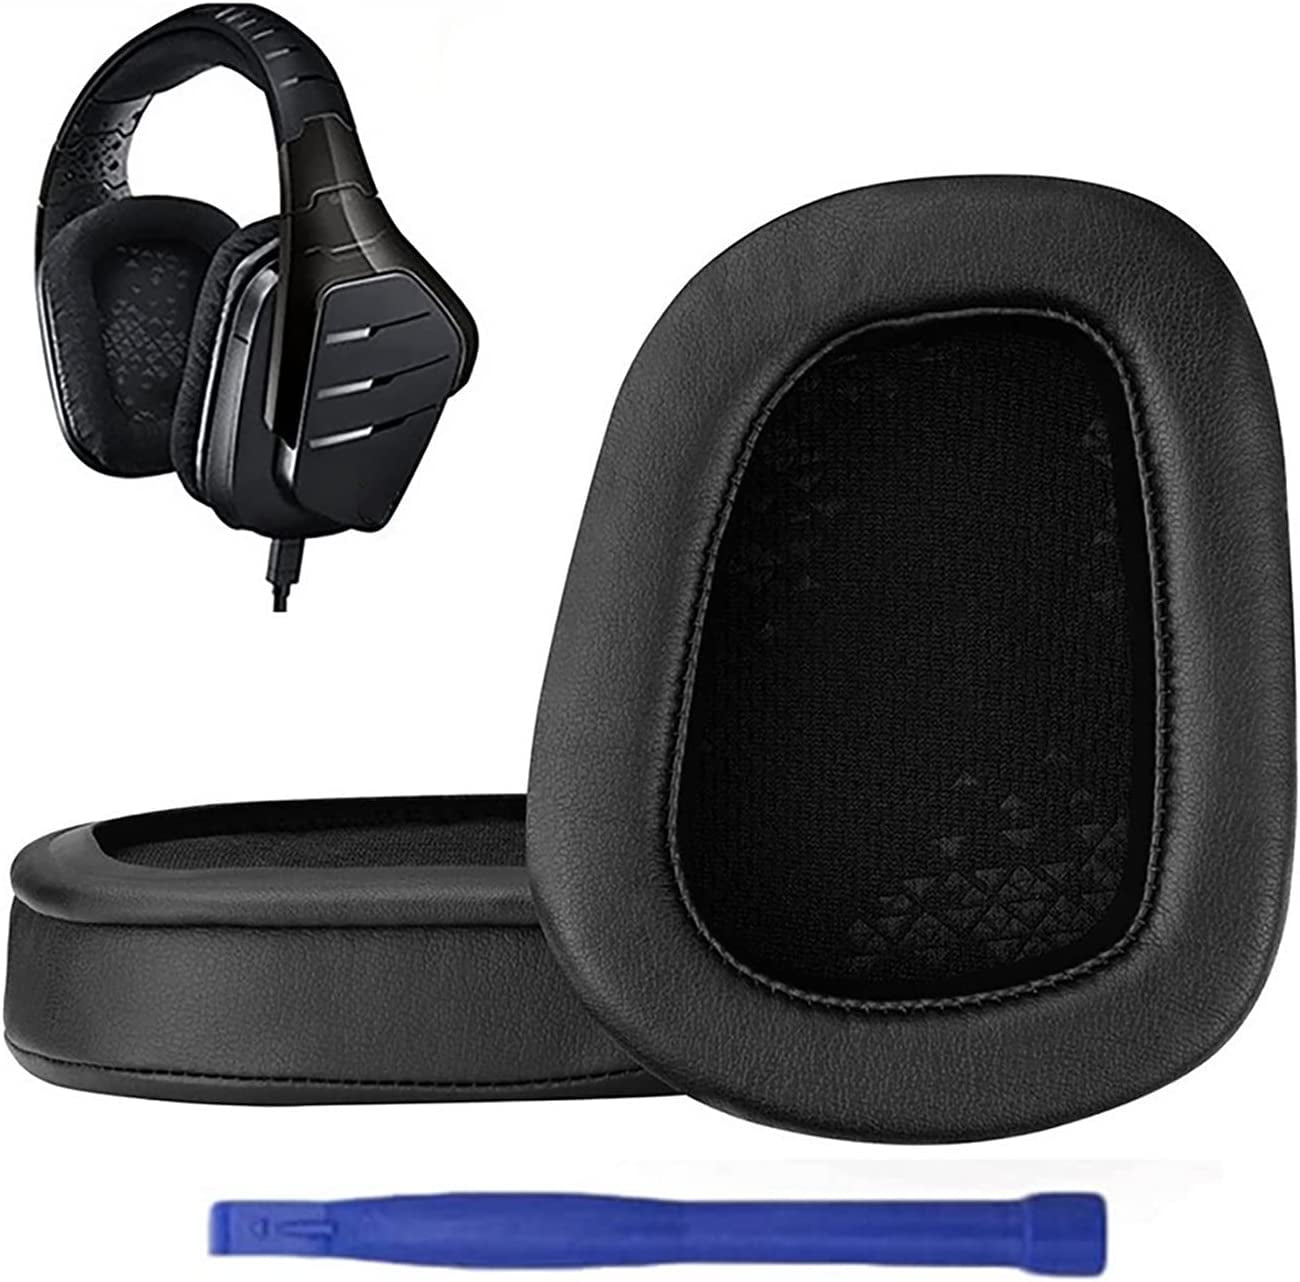 Adhiper Replacement Pads for G933, Ear Cushions Compatible with Logitech G633/G933 Premium Leather Softer Memory Foam(Black/Protein Leather) - Walmart.com